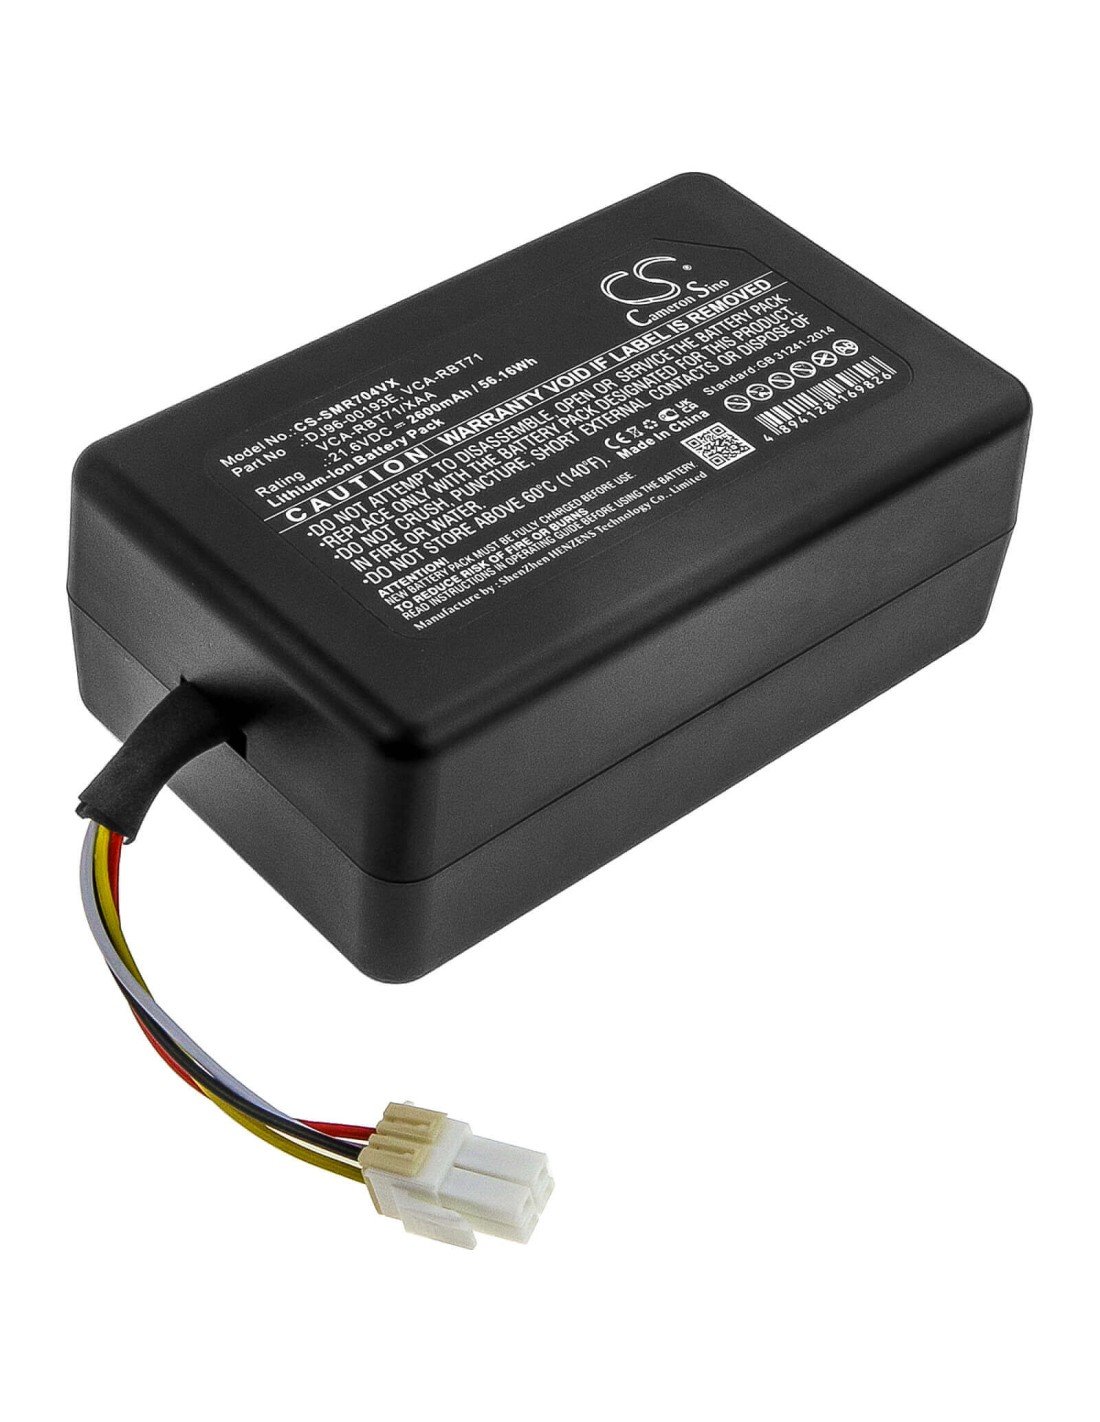 Battery for Samsung, Powerbot R7040, R1am7010uw / Aa, Vr1am7010u5 / Aa 21.6V, 2600mAh - 56.16Wh